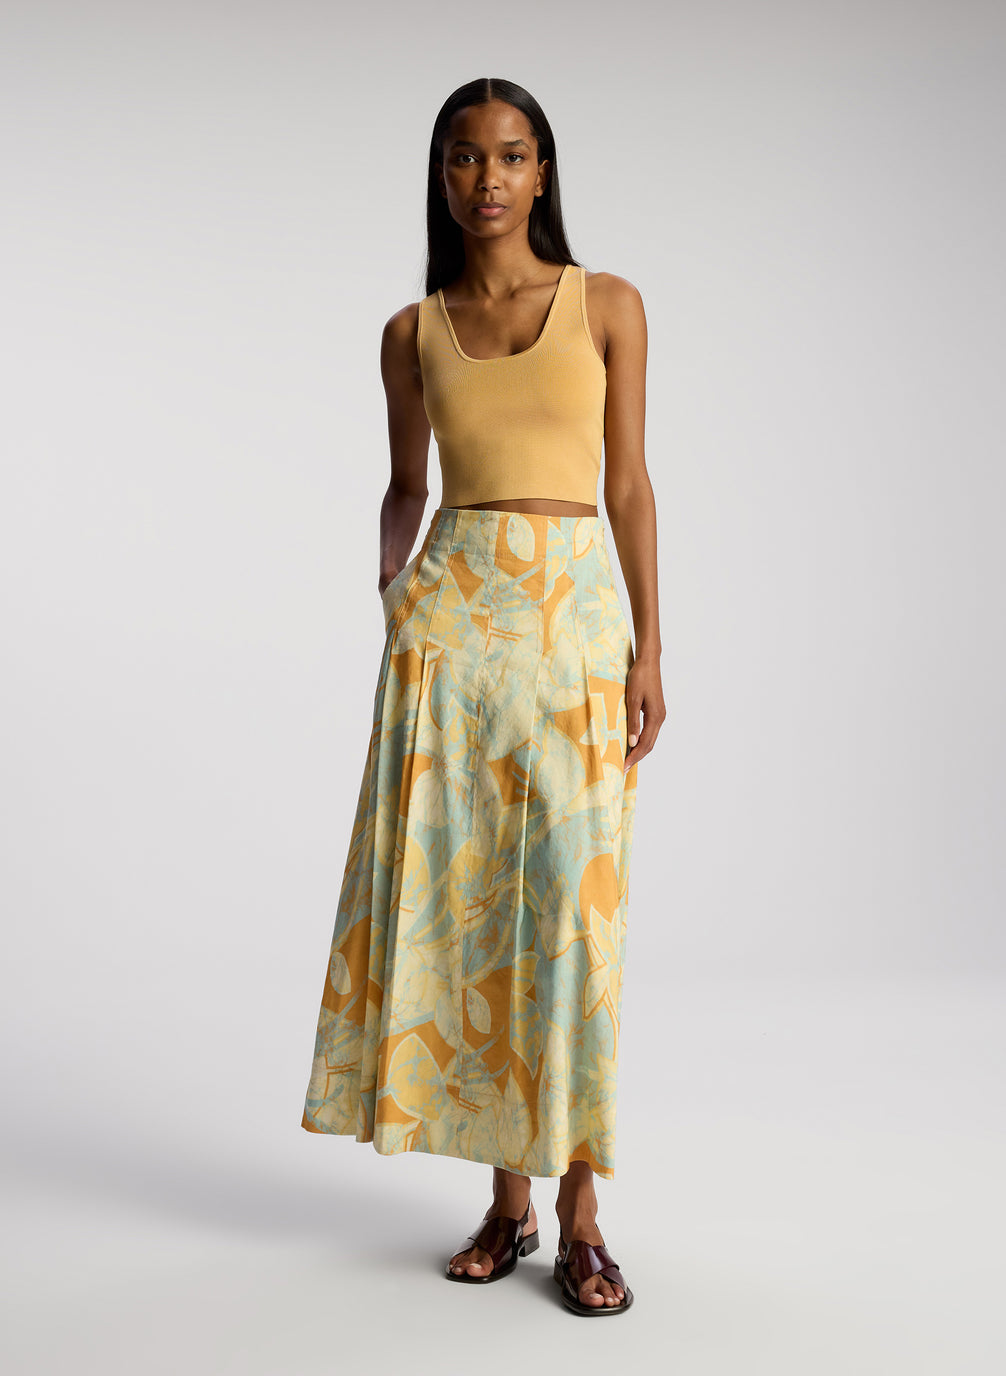 front view of woman wearing tan sleeveless top with multicolor printed midi skirt